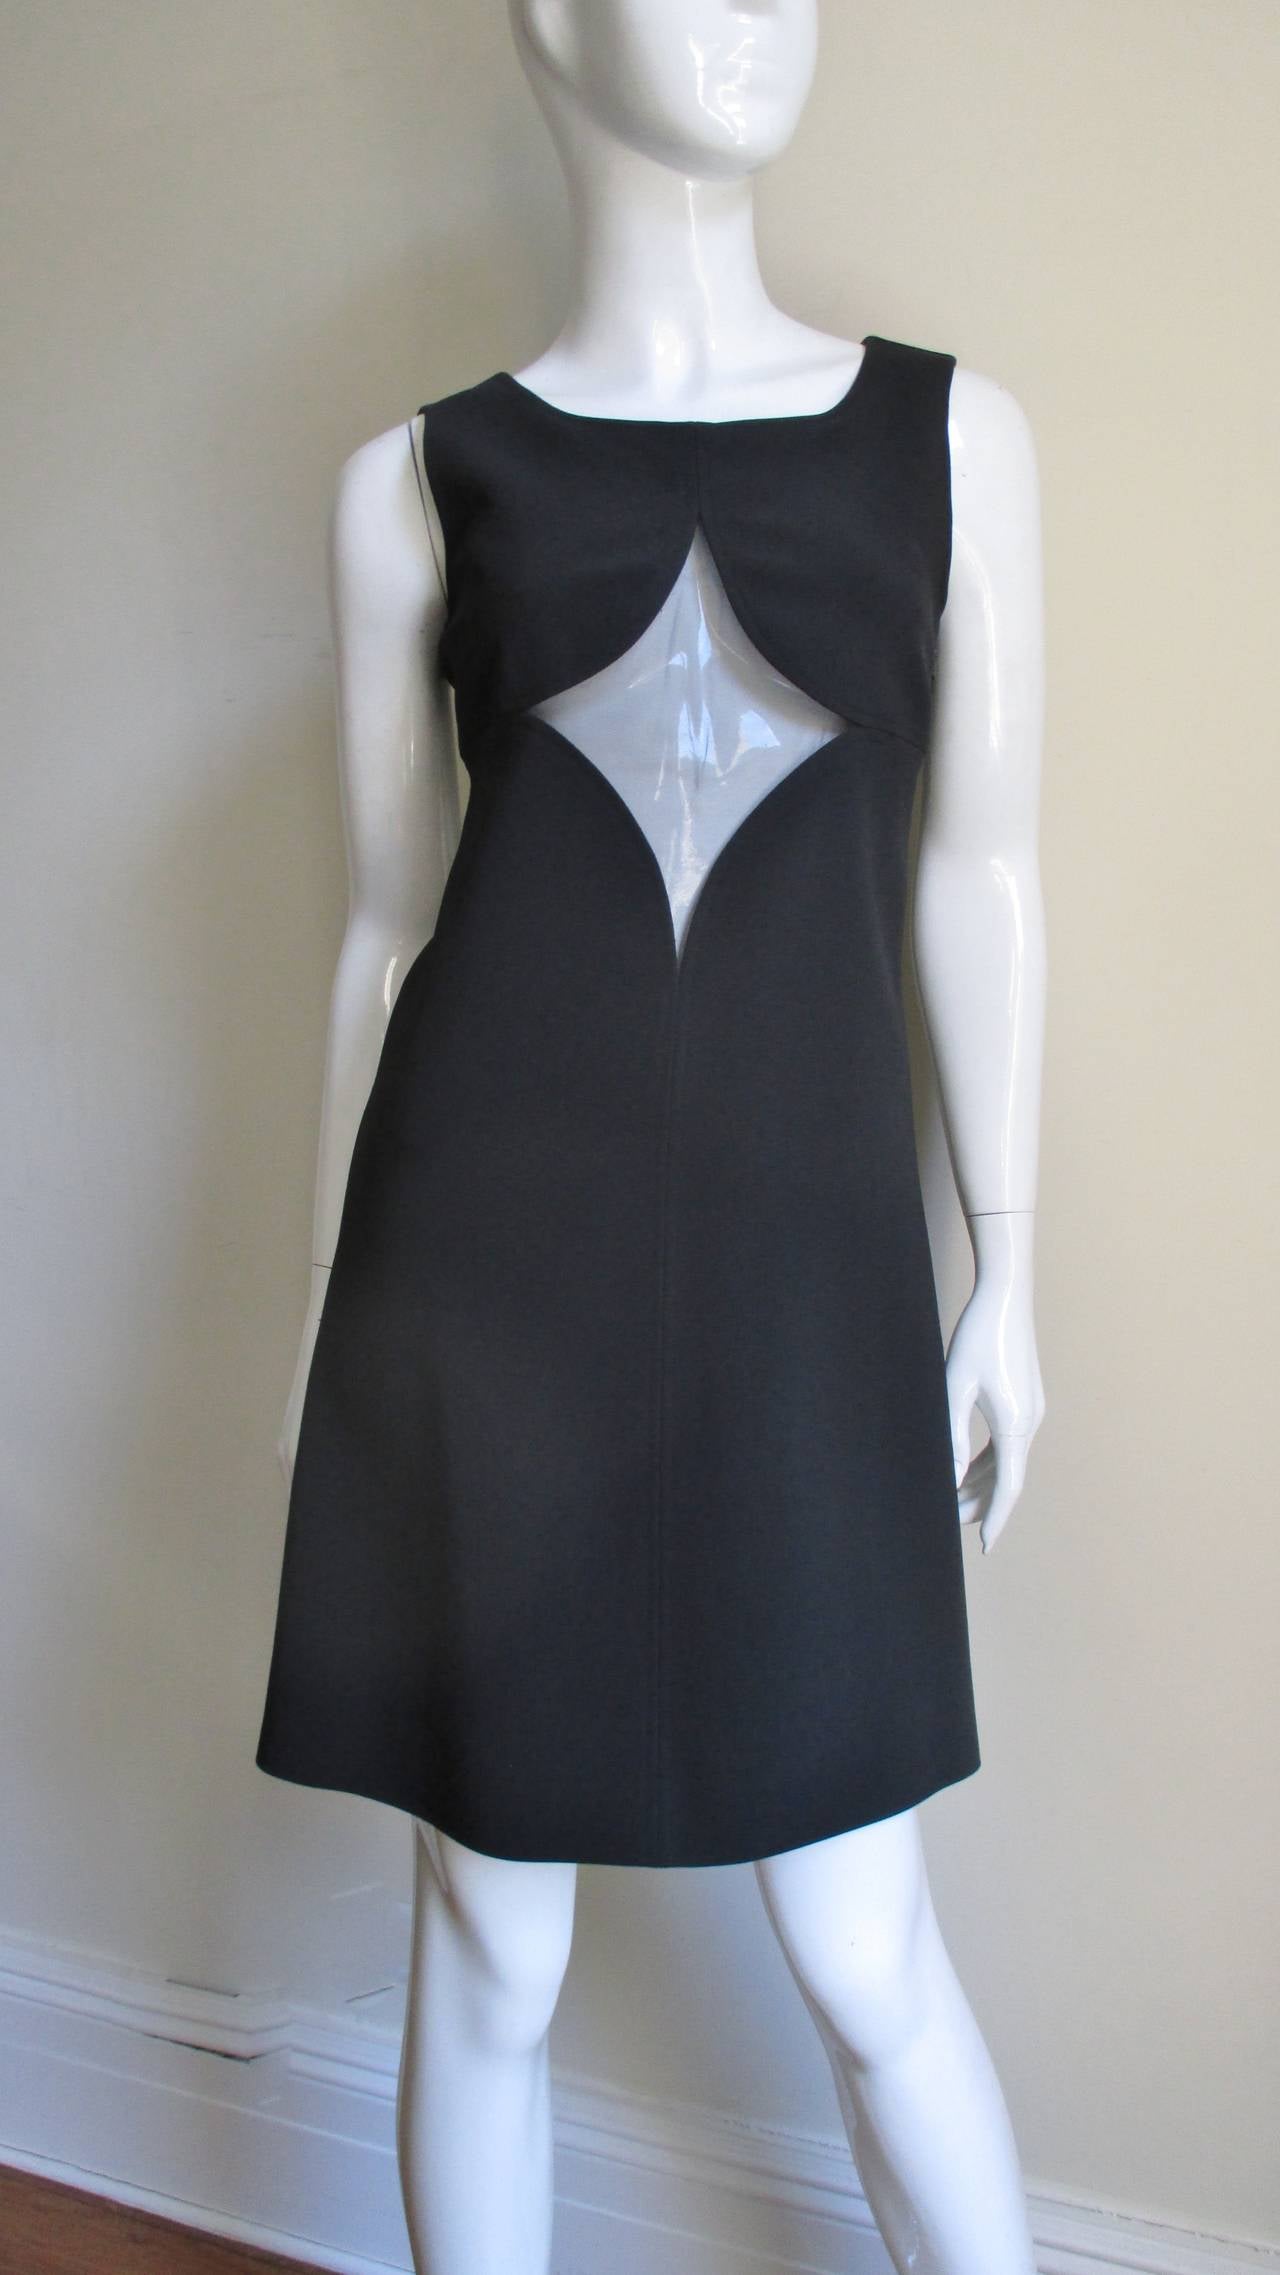 A simple sleeveless black jersey A line dress with a dramatic sheer covered cut out in the front and back from Courreges. It is fully lined and has a side zipper.  
Fits sizes Extra Small, Small, Medium.

Bust  34